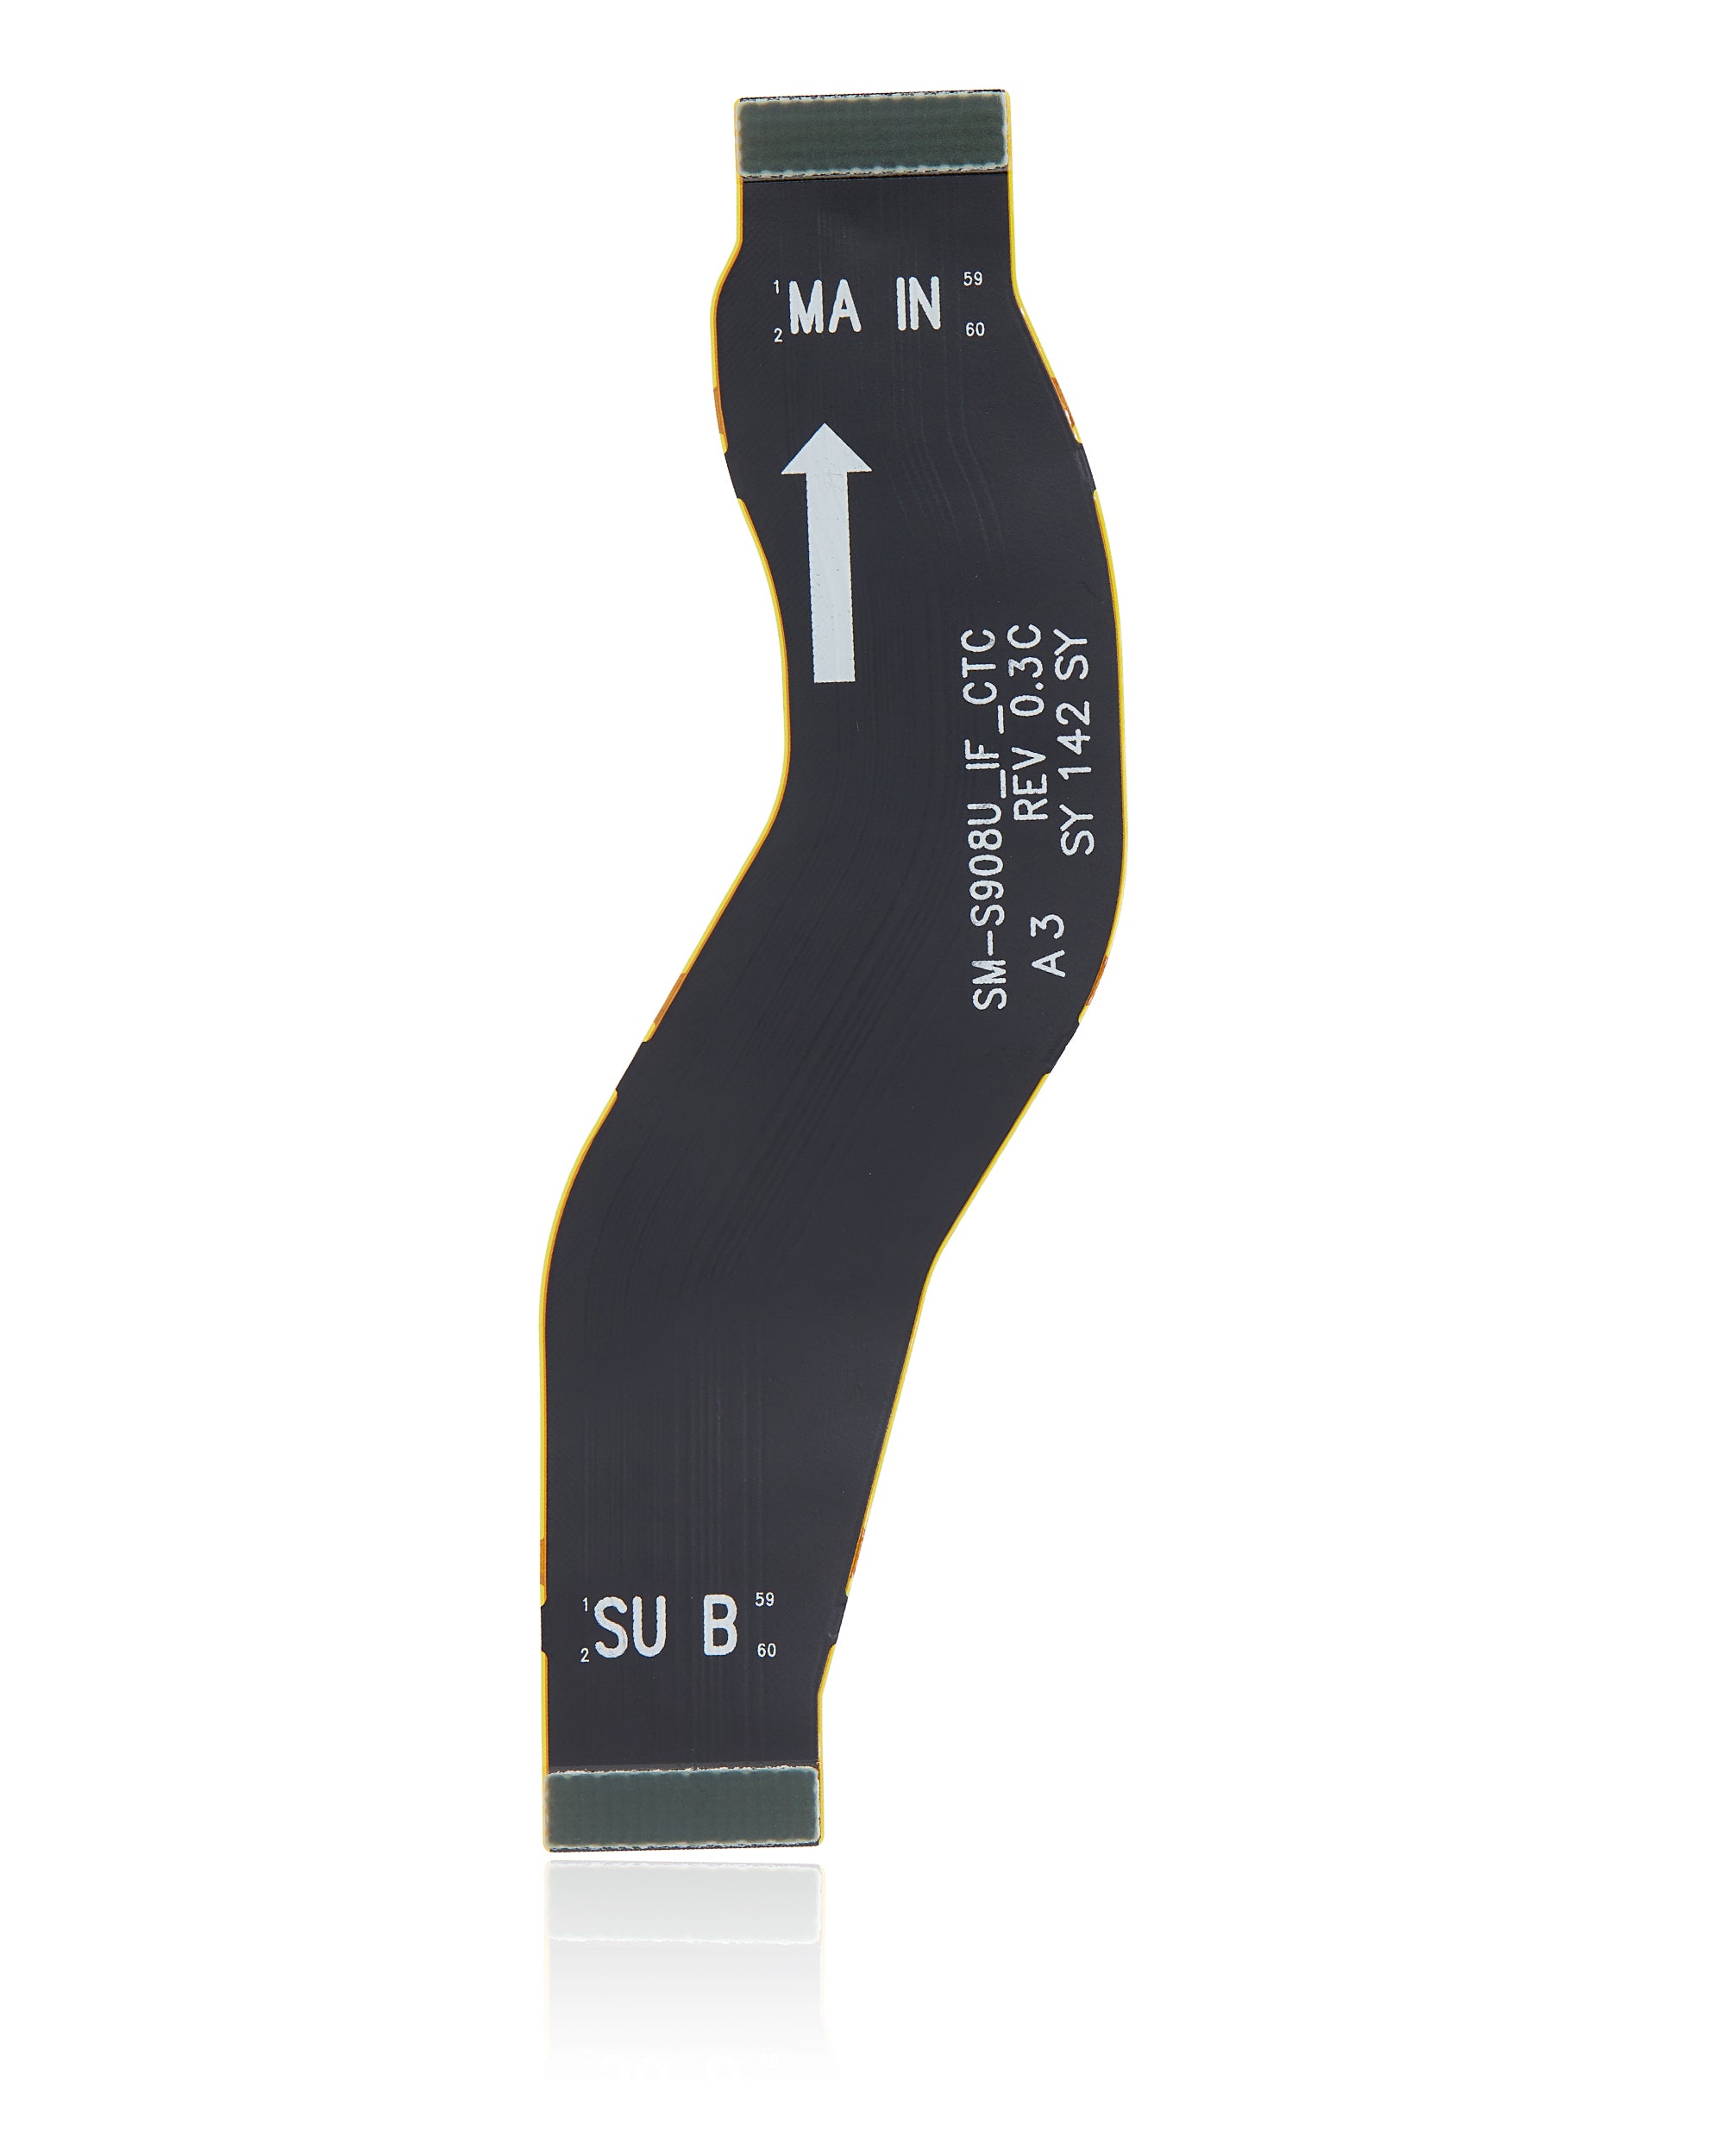 For Samsung Galaxy S22 Ultra 5G Main Board Flex Cable Replacement